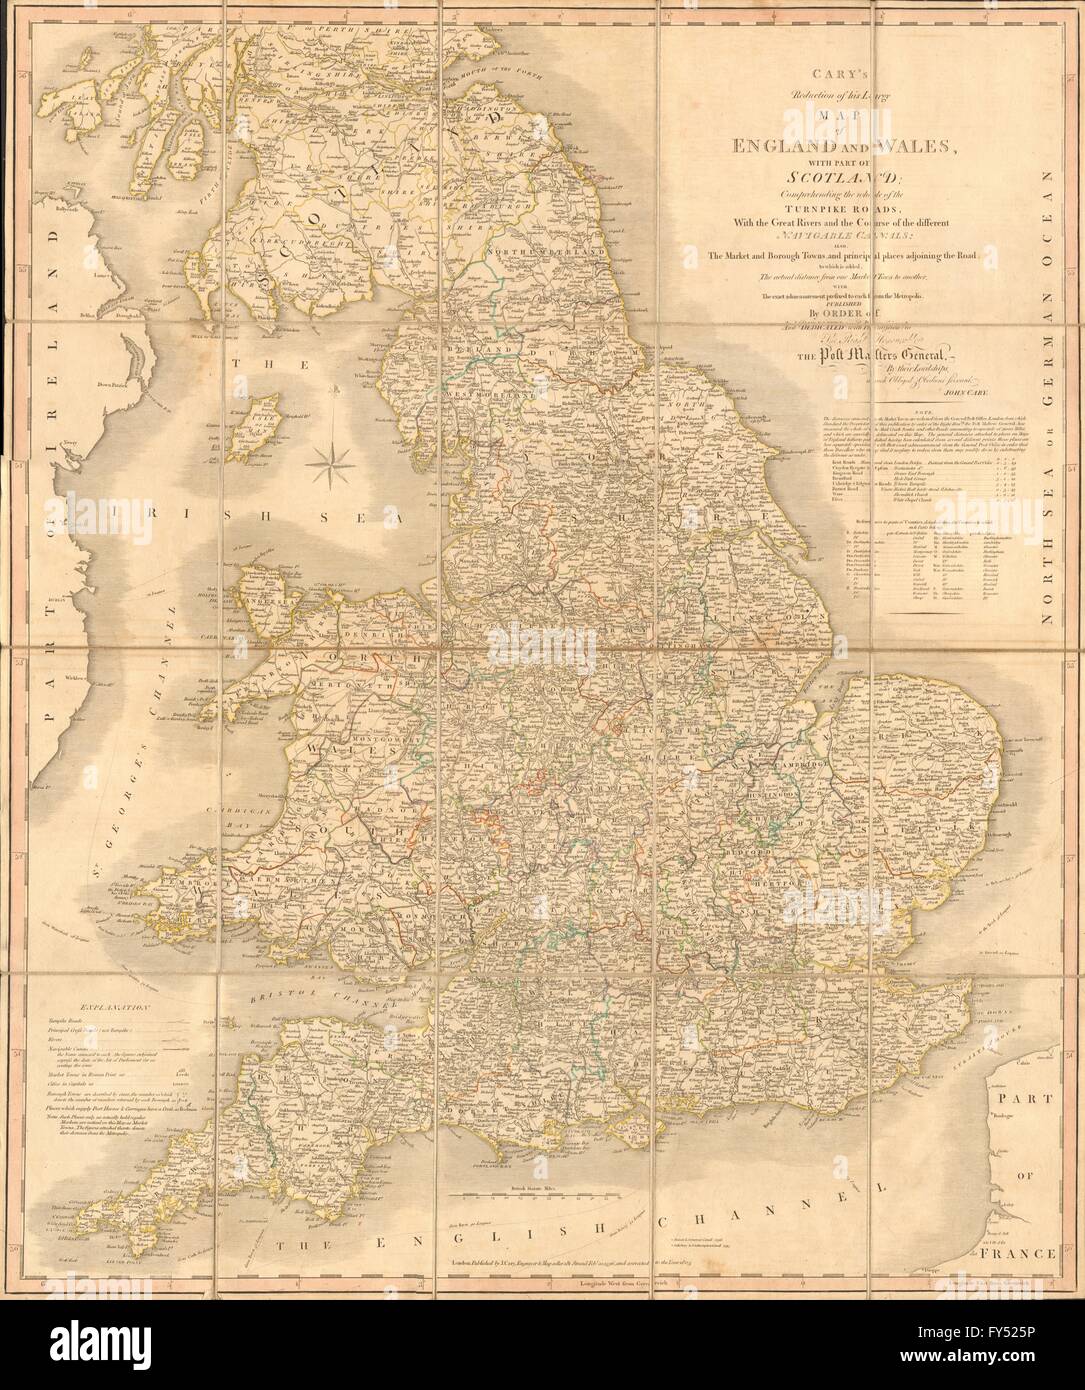 'Cary's reduction of his large map of England & Wales'. Turnpikes canals &c 1805 Stock Photo